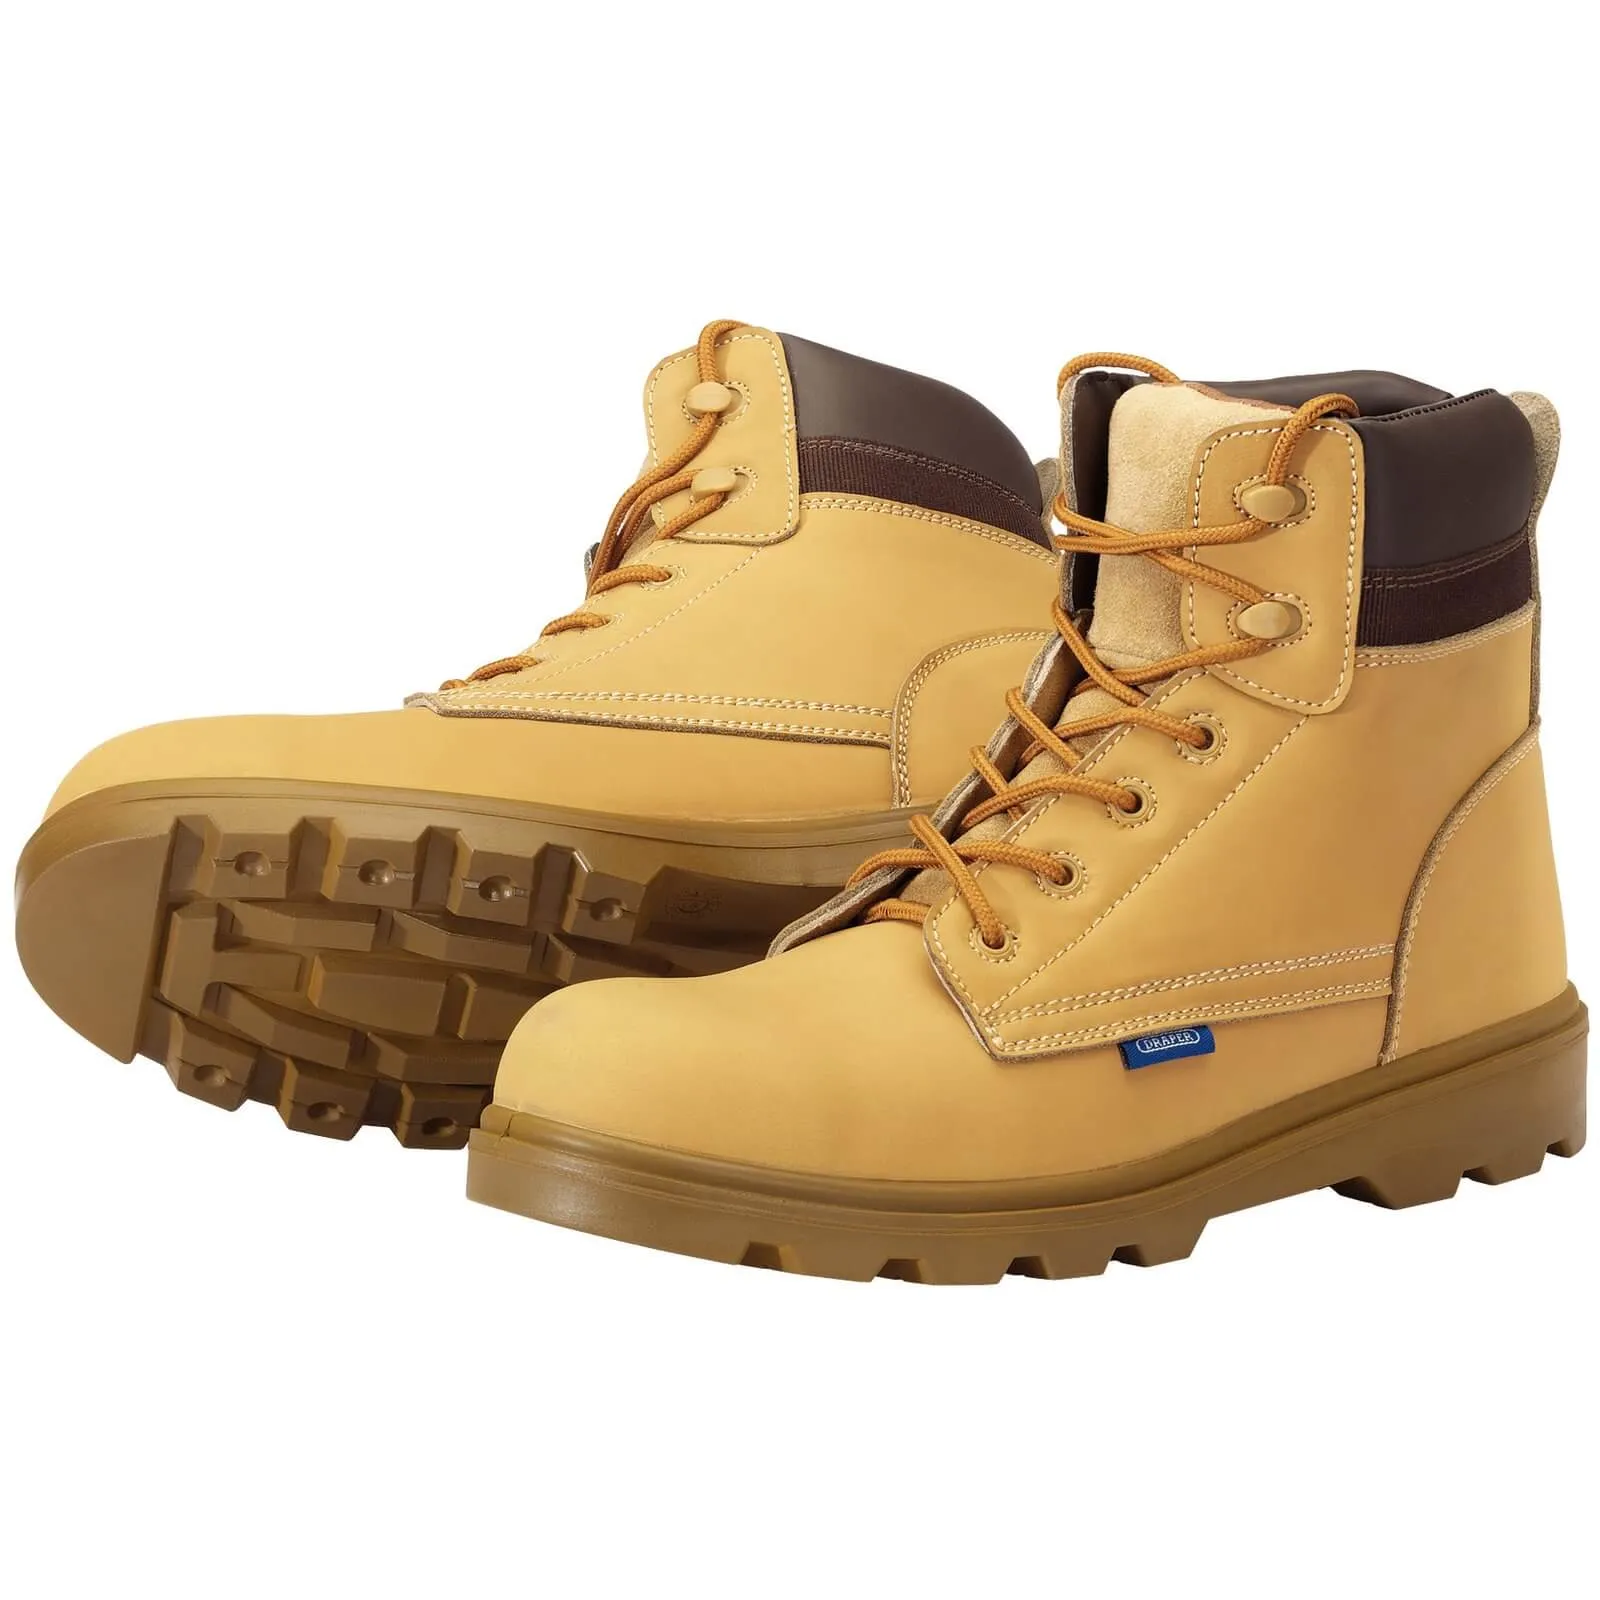 Draper Mens Nubuck Style Safety Boots - Tan, Size 8